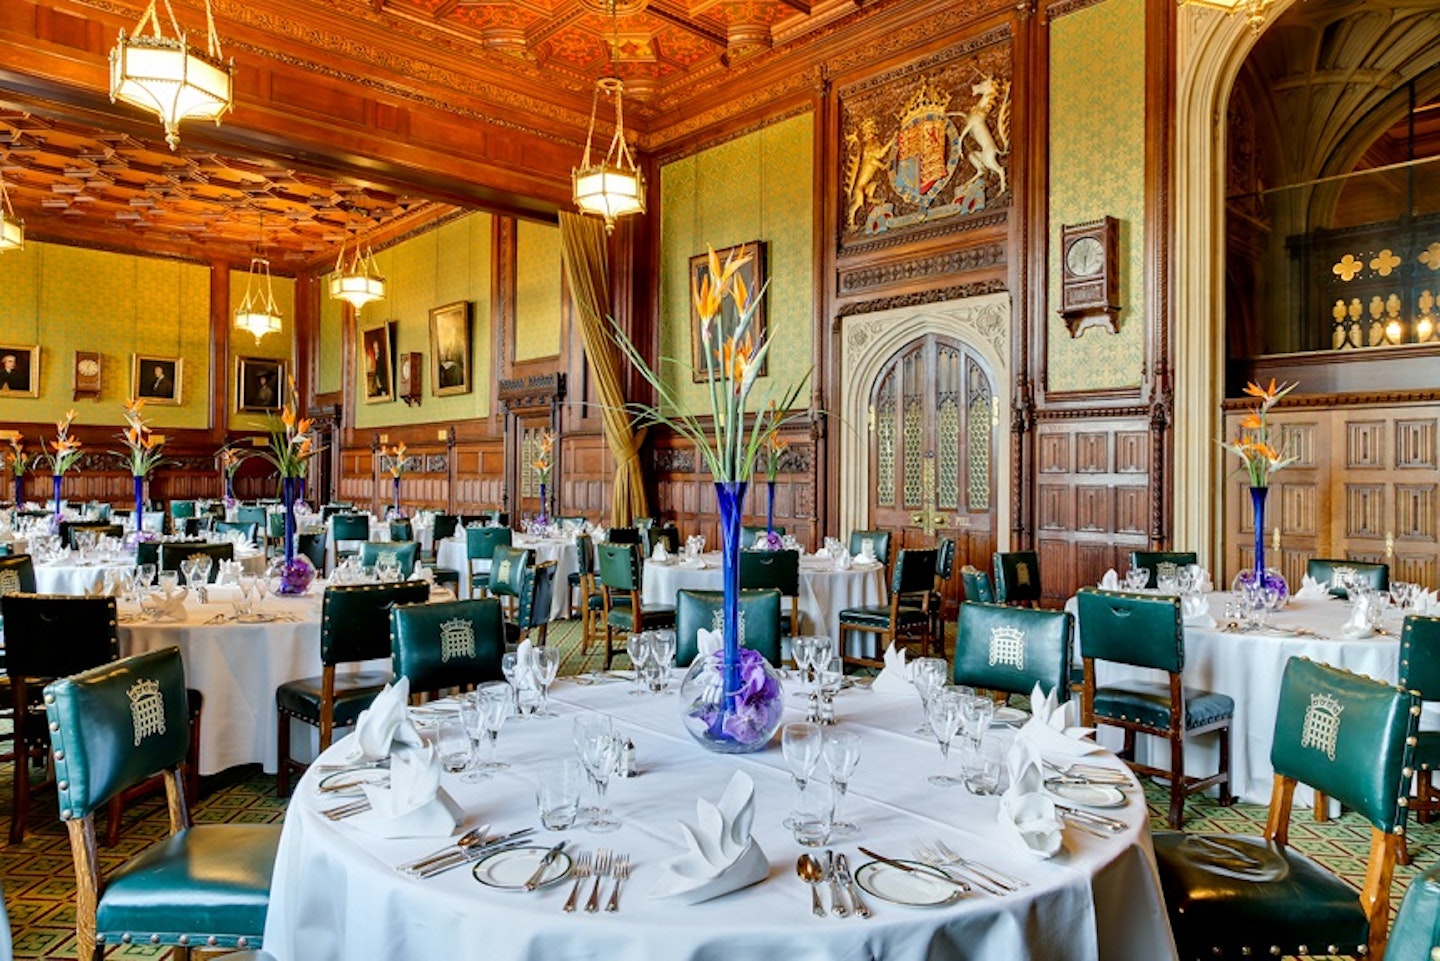 Members dining room at the house of commons